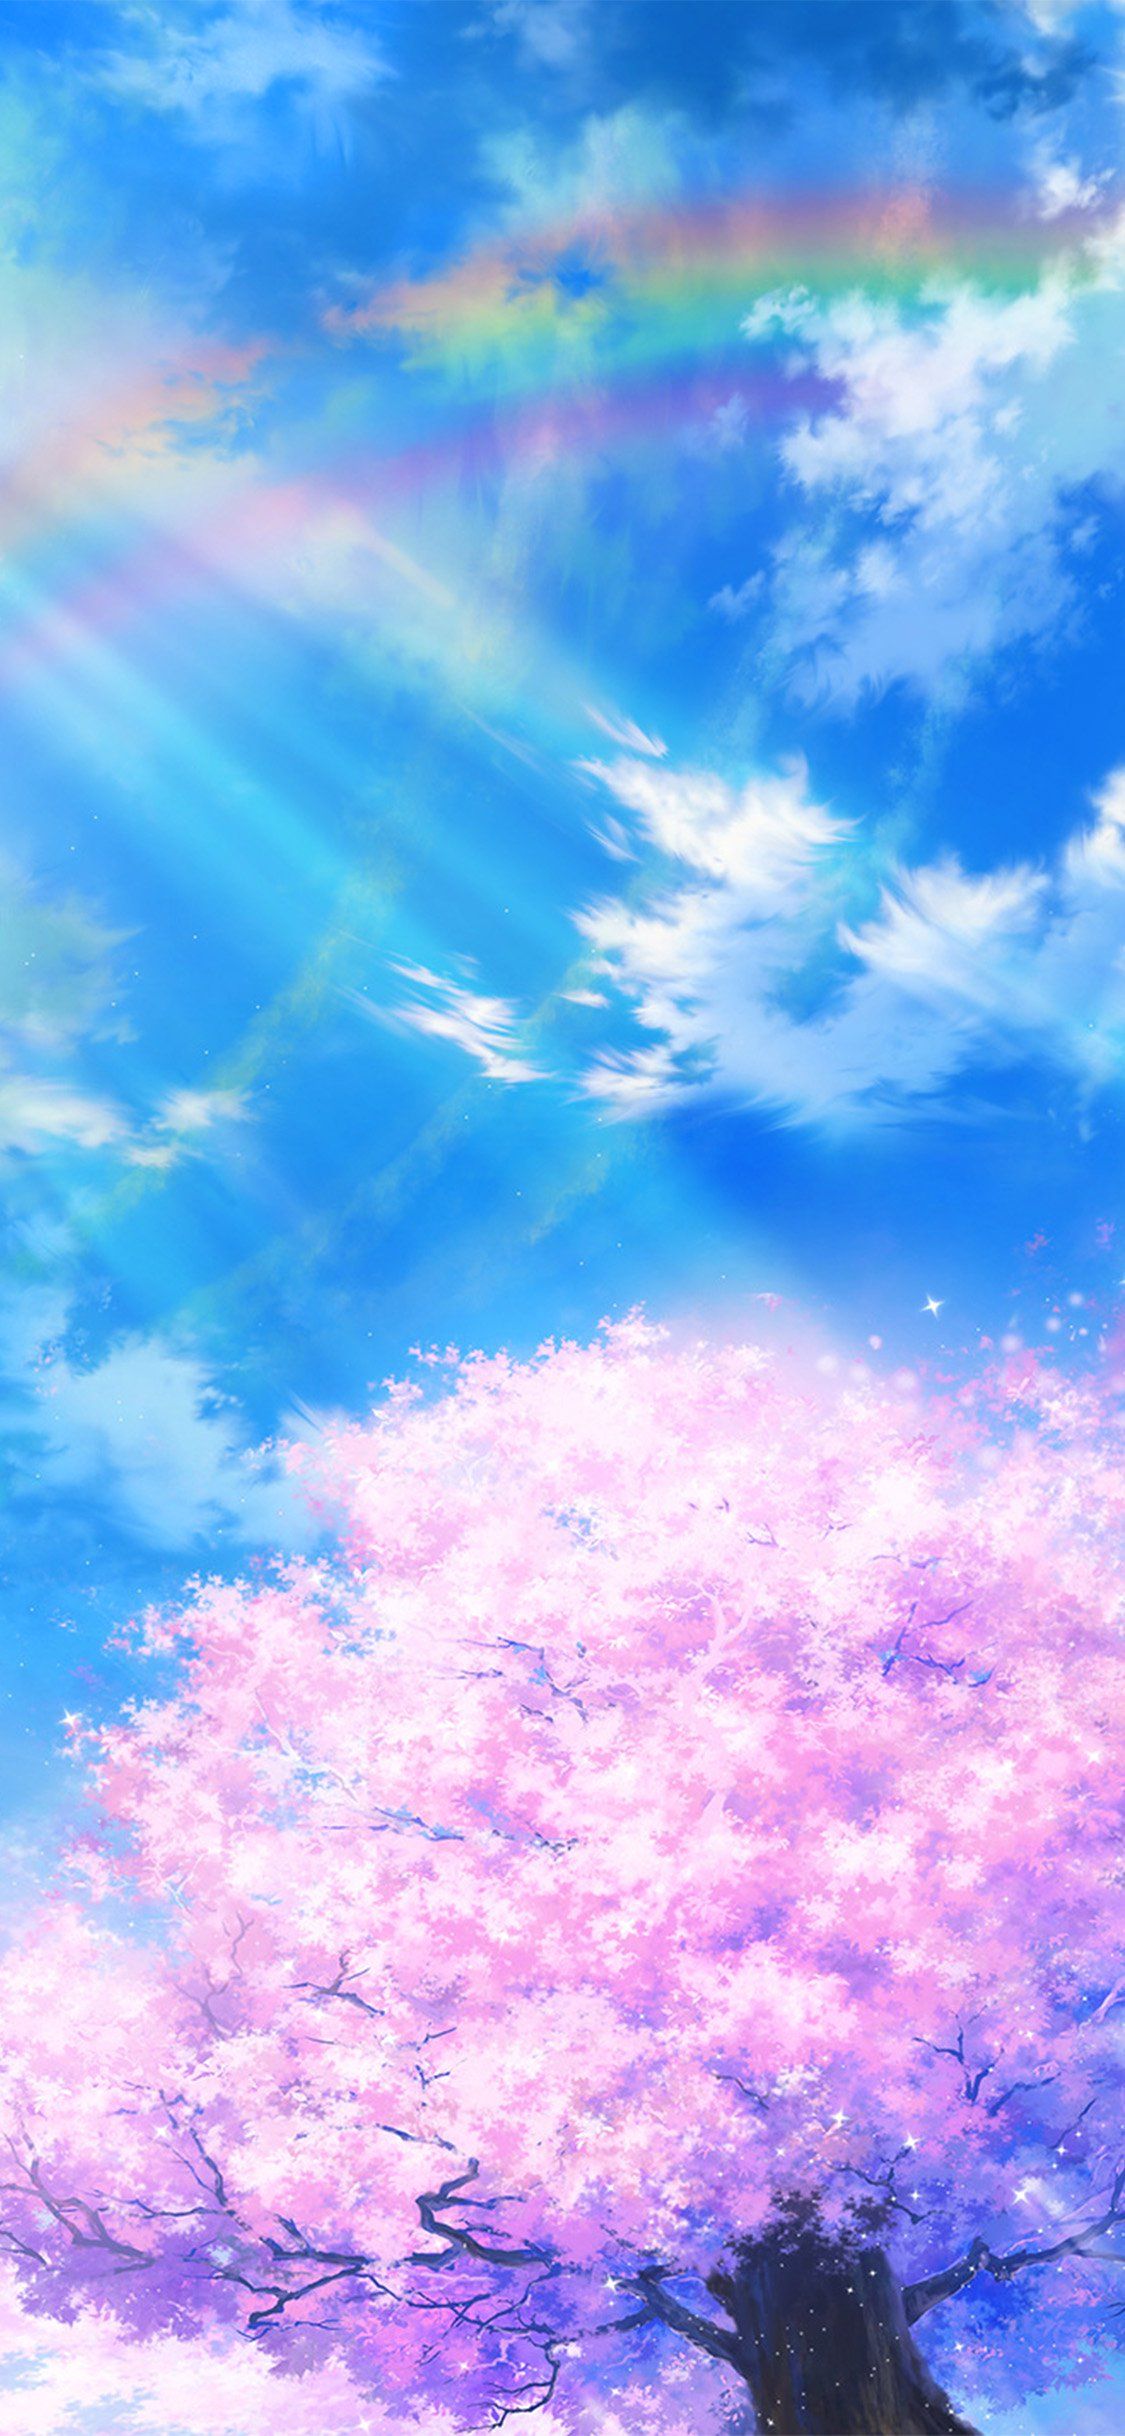 Anime sky cloud spring art illustration iPhone X Wallpaper Free Download